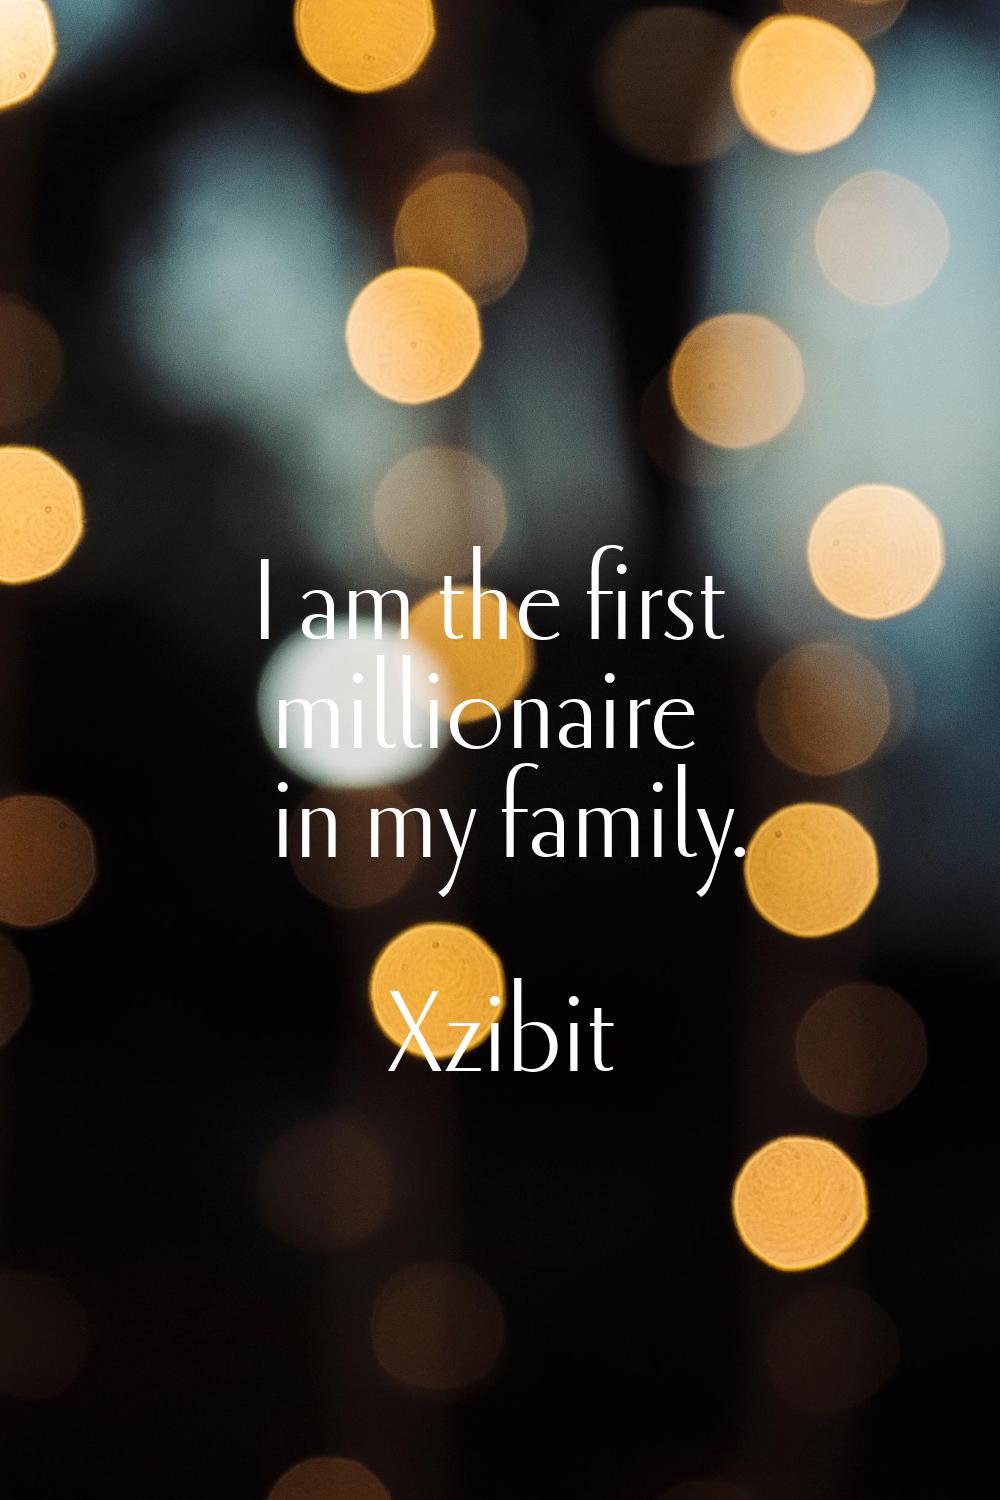 I am the first millionaire in my family.